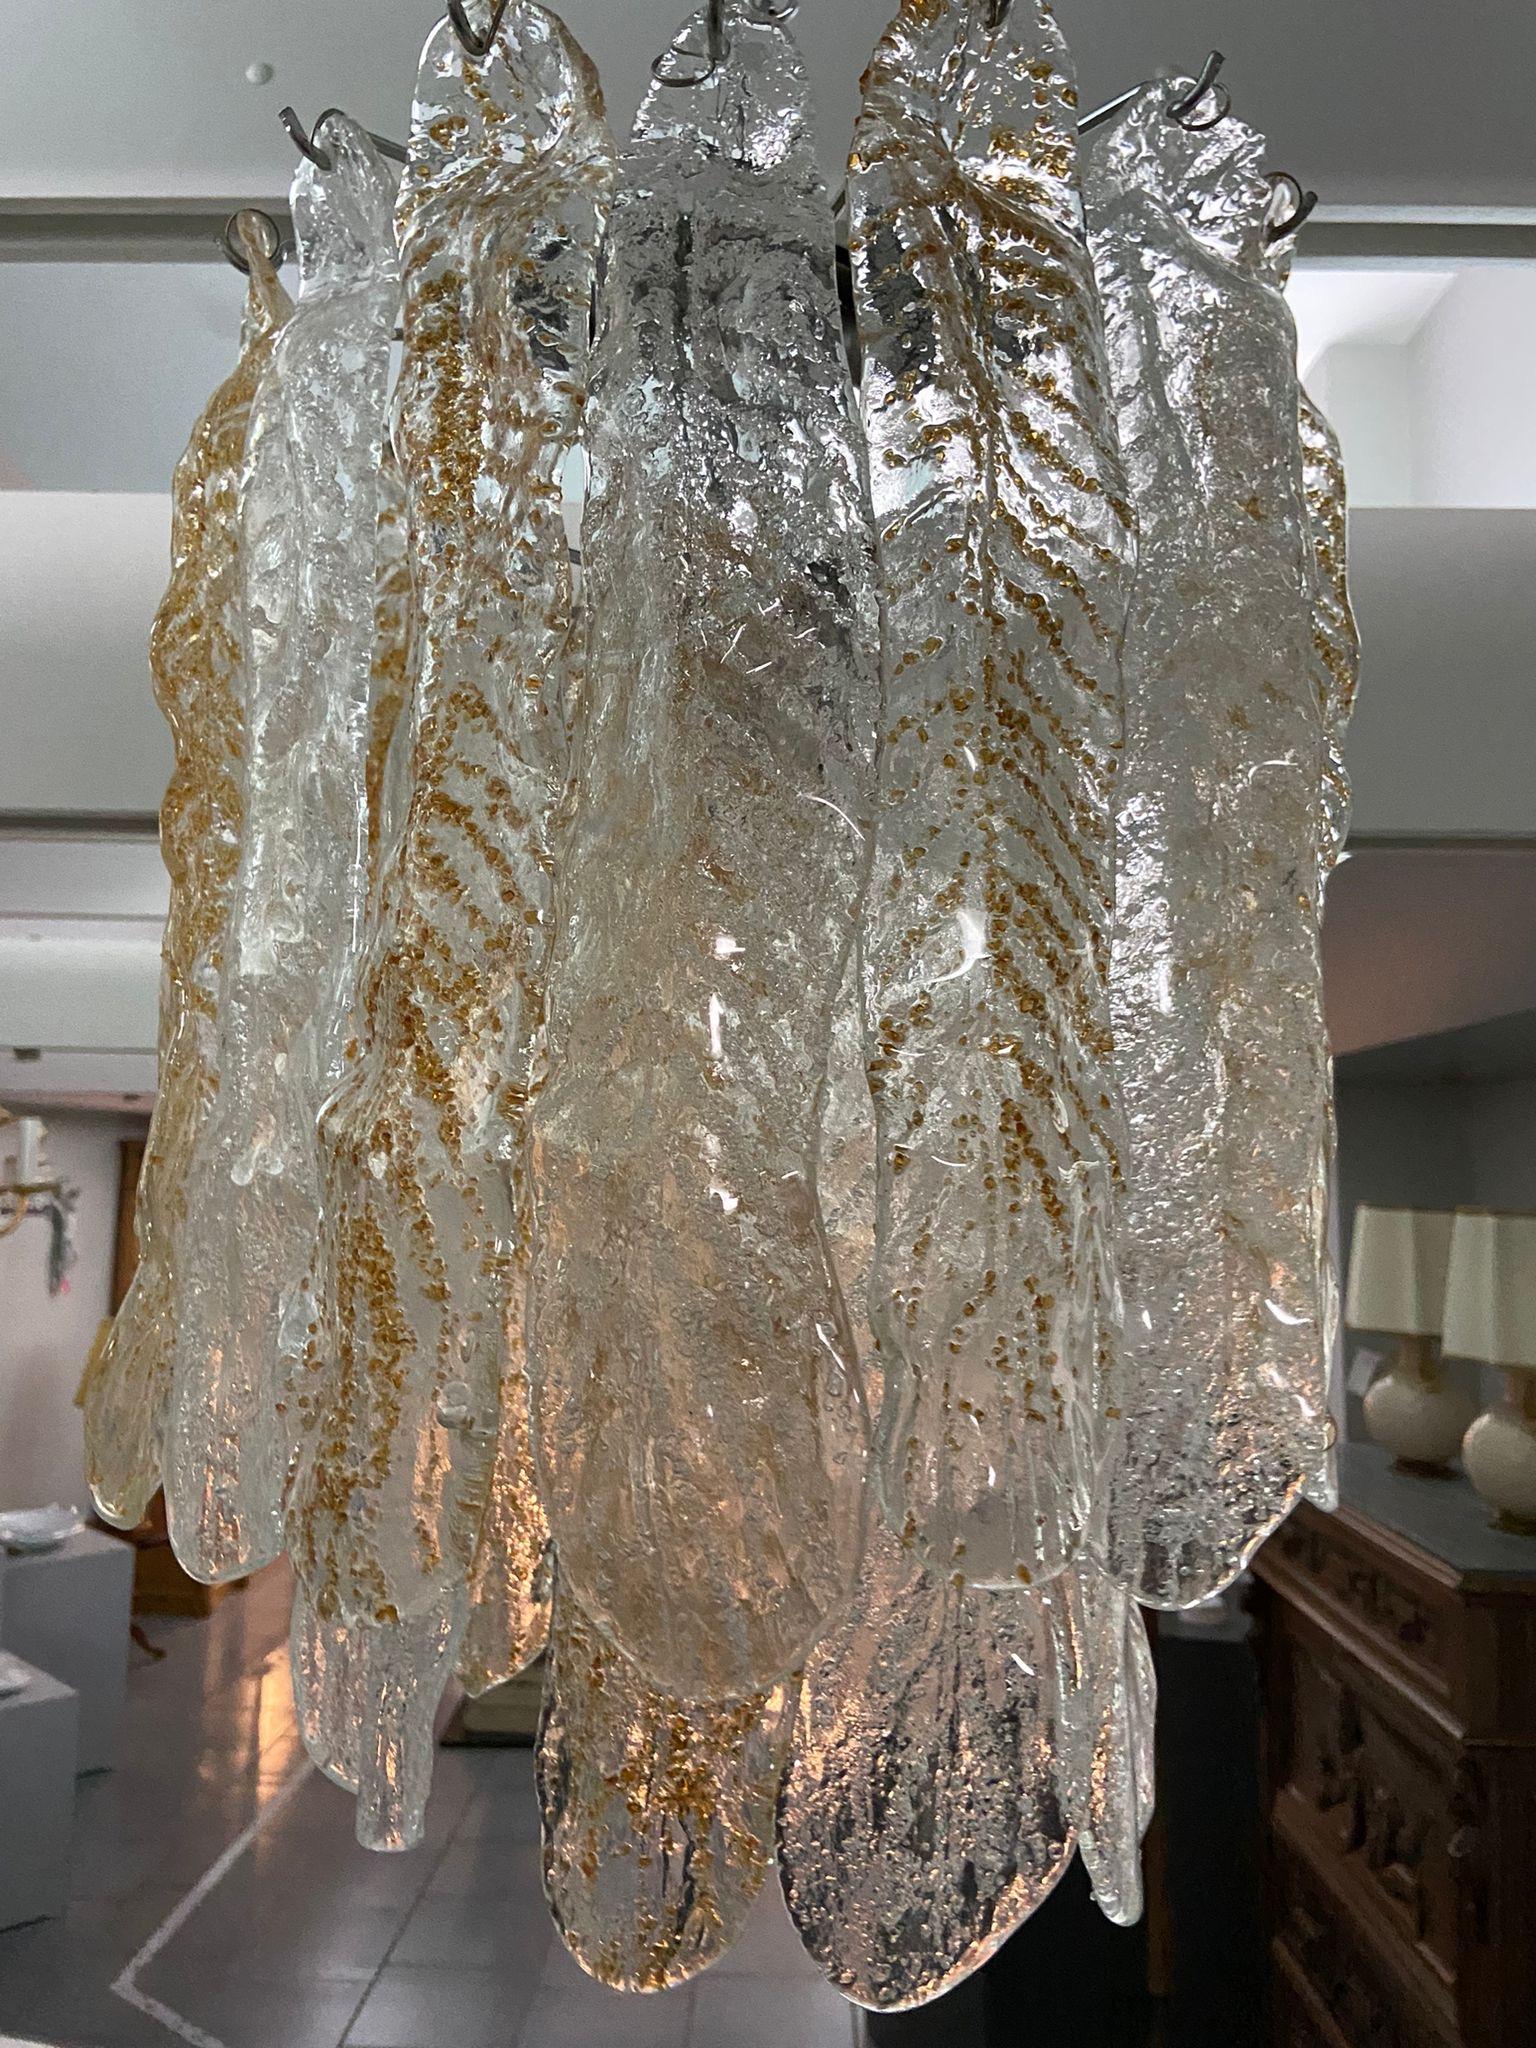 1970s Mid-Century Modern Murano Glass Cascade Chandelier by Mazzega In Excellent Condition For Sale In Aci Castello, IT